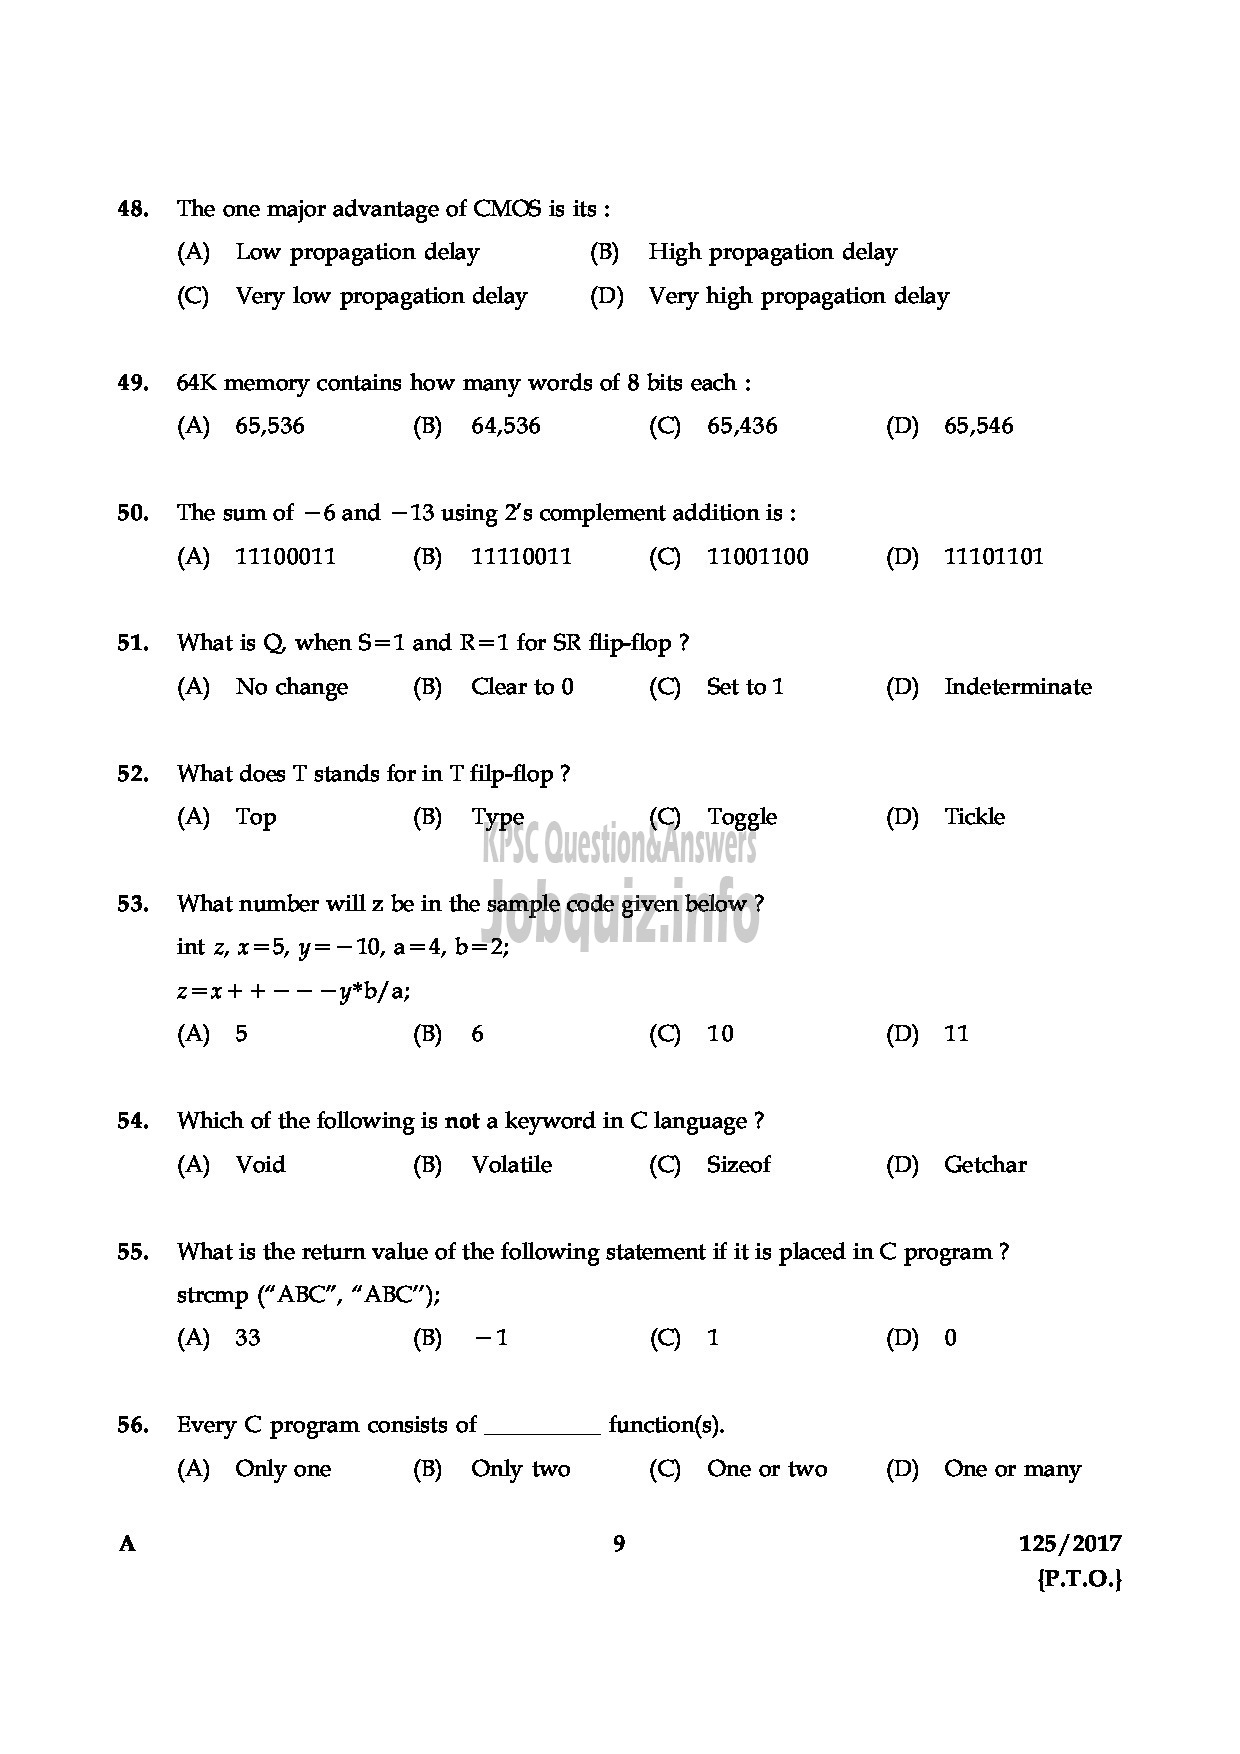 Kerala PSC Question Paper - LECTURER IN COMPUTER APPLICATION COLLEGIATE EDUCATION-9